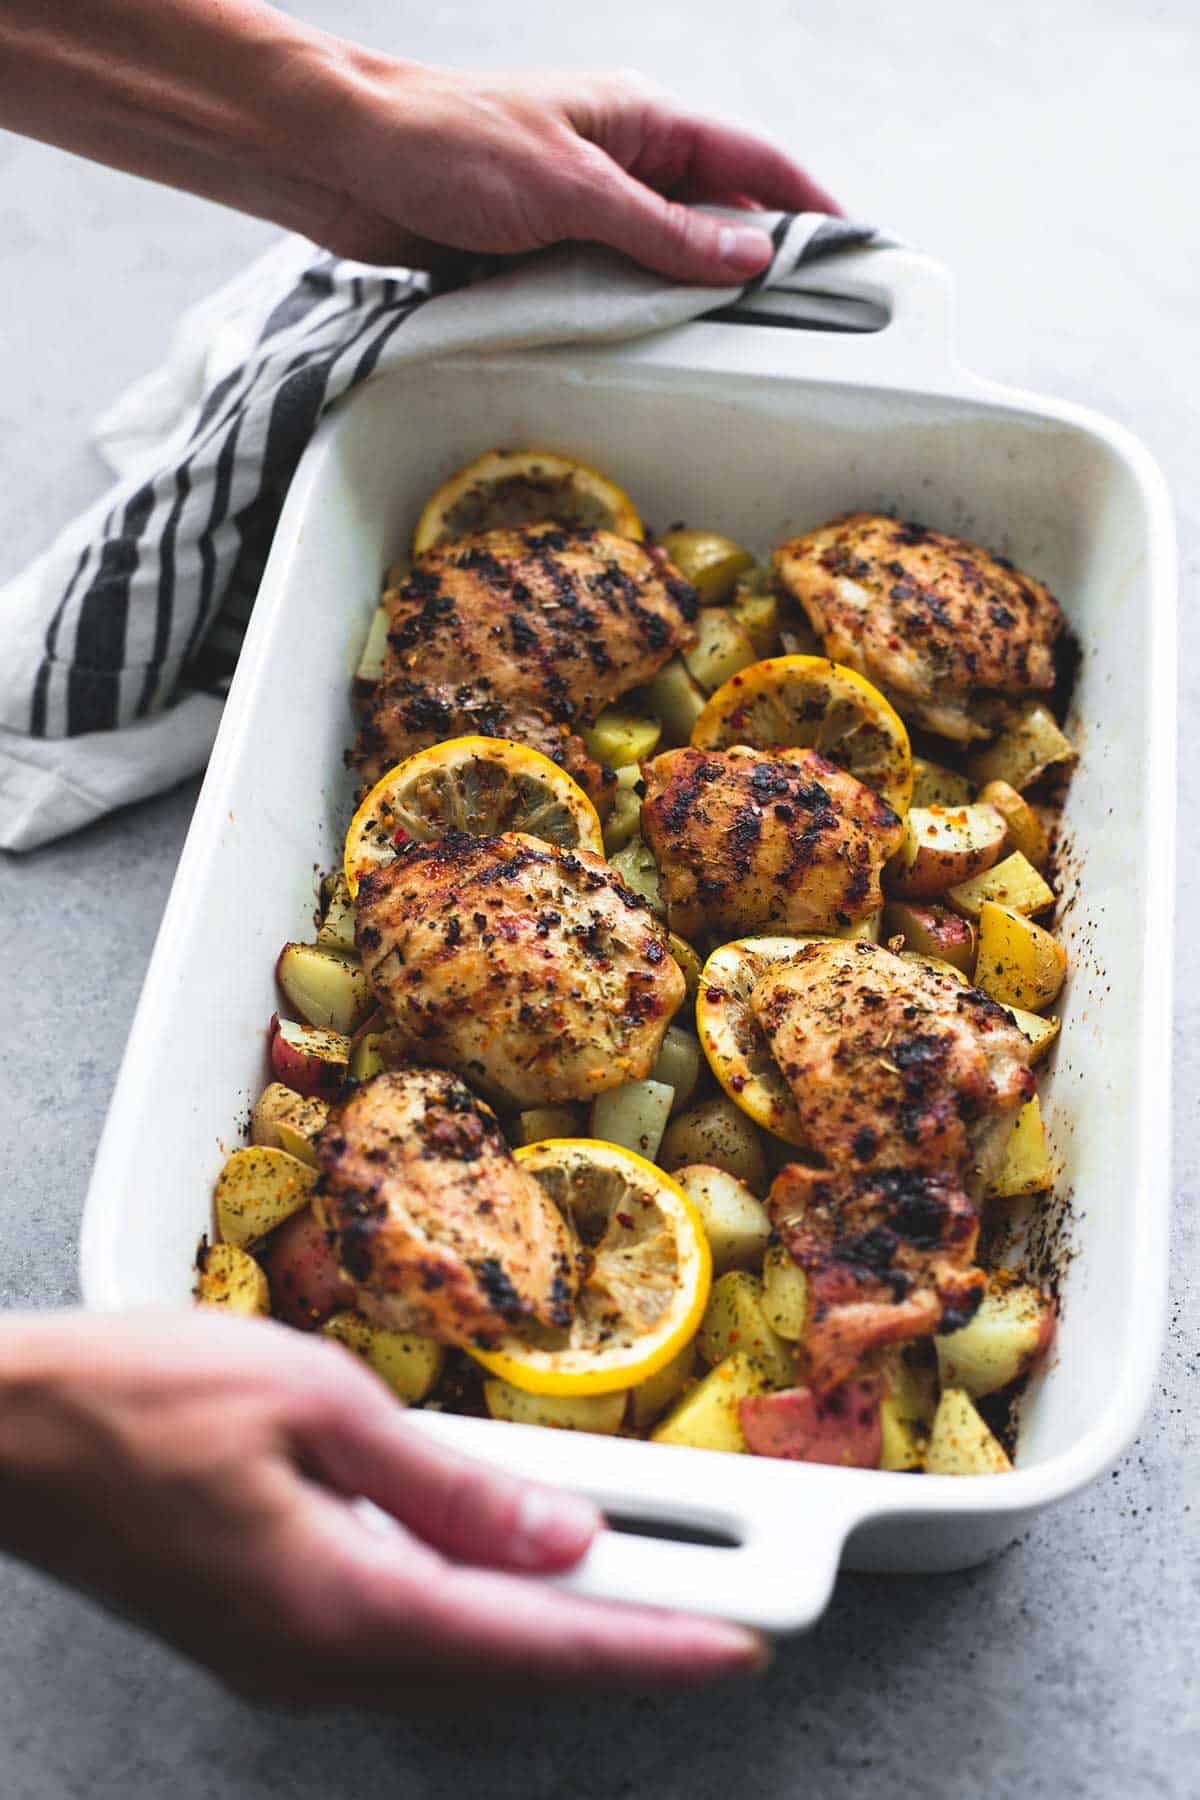 hands holding an oven pan with baked lemon herb chicken & potatoes in it.